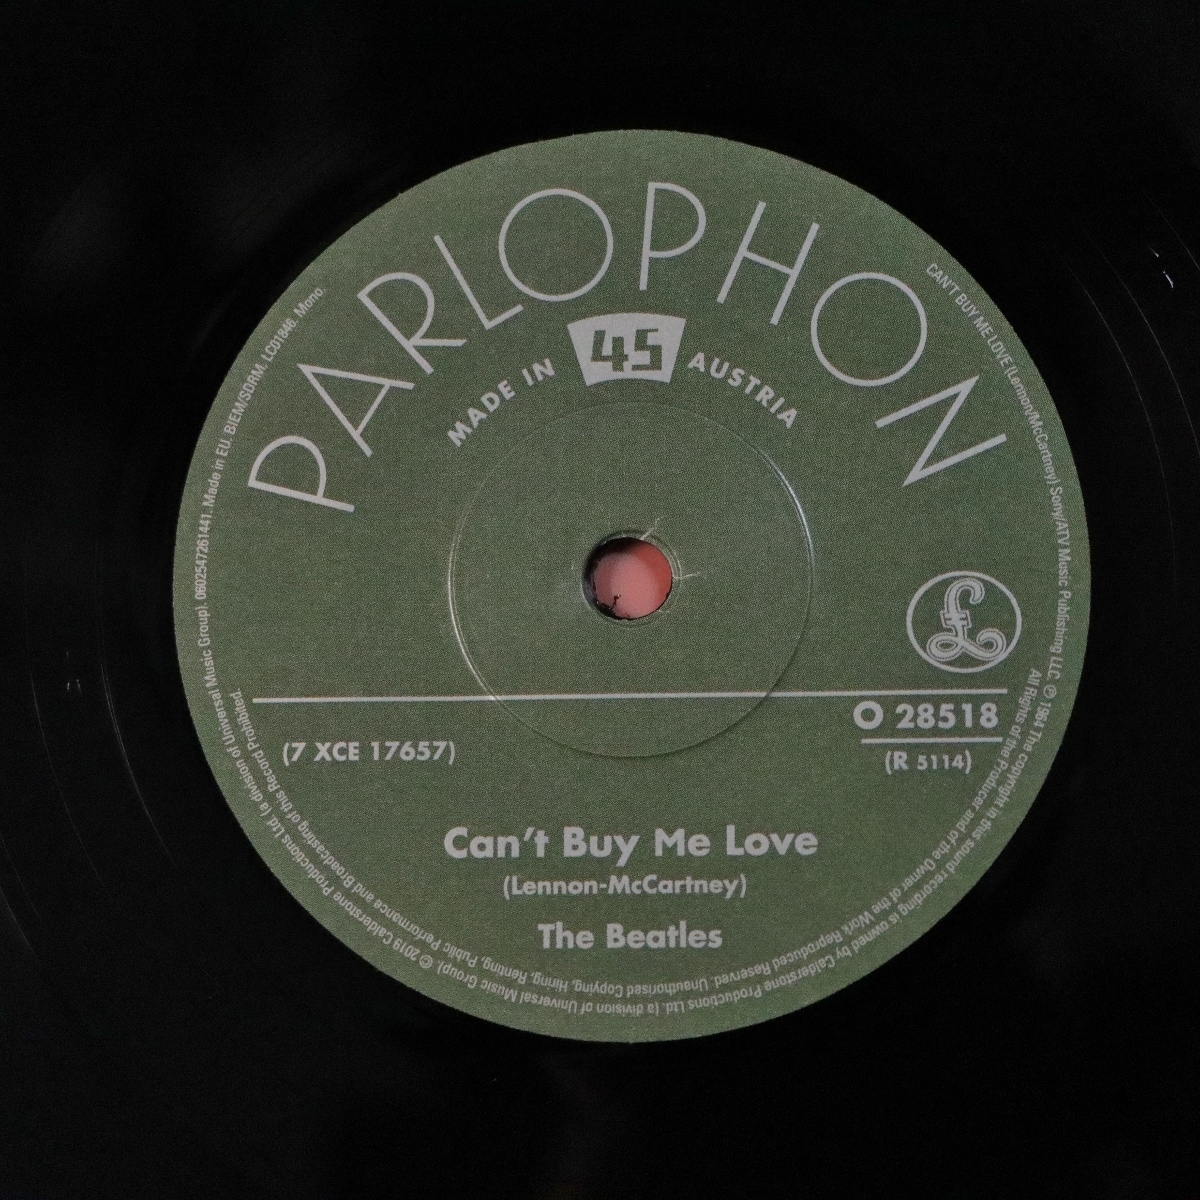 The Beatles/ビートルズ CAN'T BUY ME LOVE / YOU CAN'T DO THAT 2019シングルボックス バラ EU盤 (オーストリア盤スリーブ) 21C26005